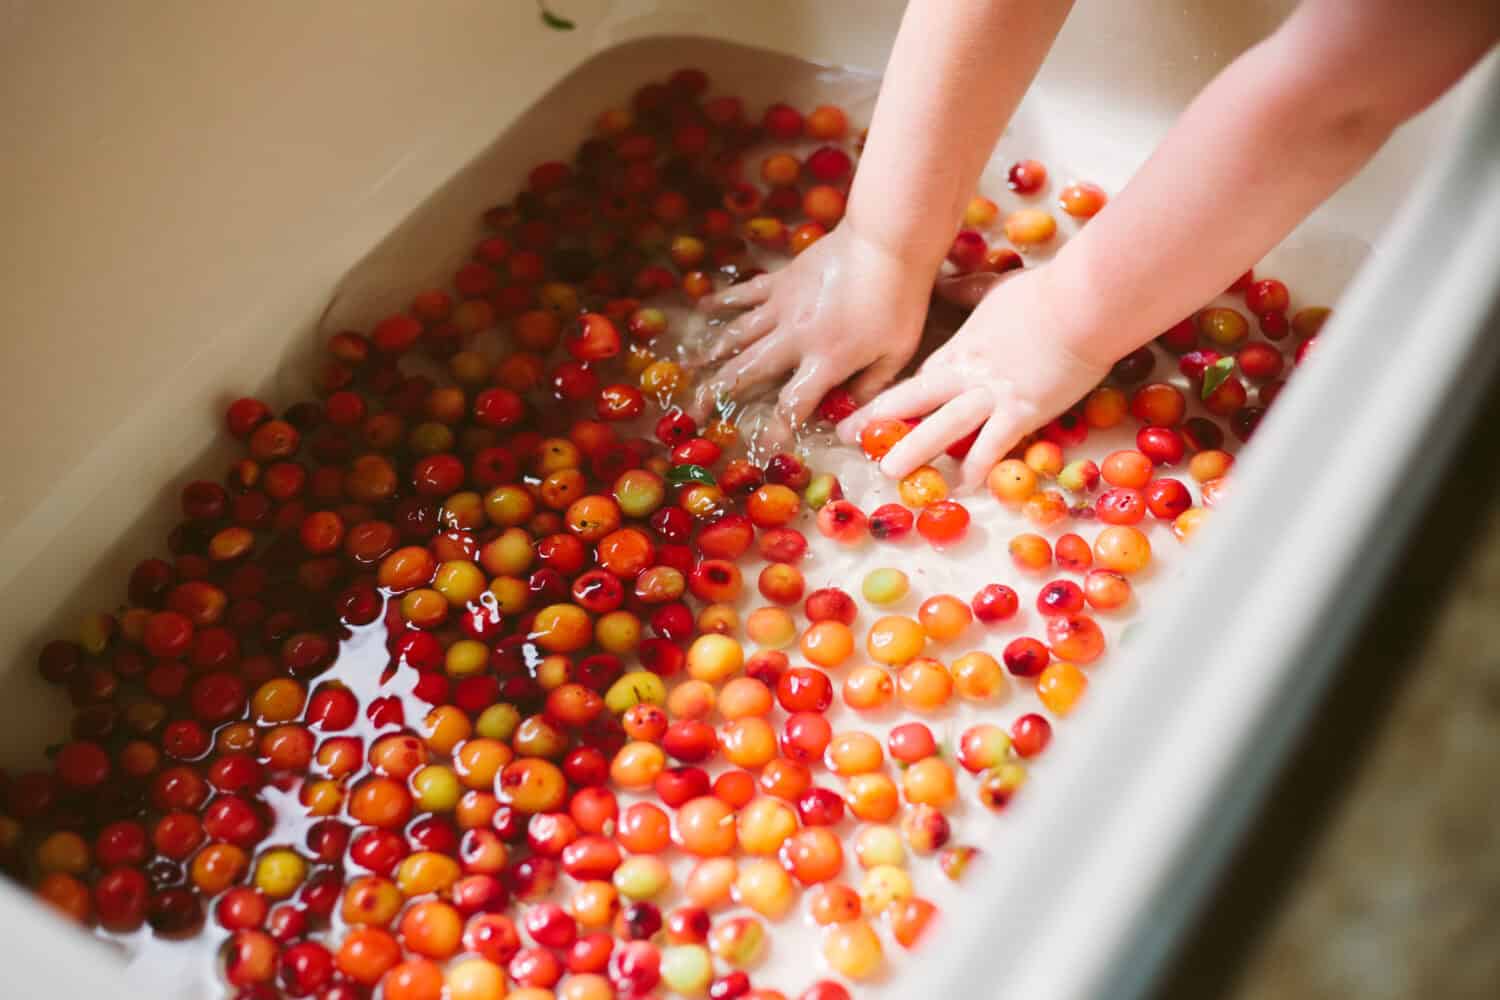 White Farmhouse sink full of wild and colorful sandhill plums